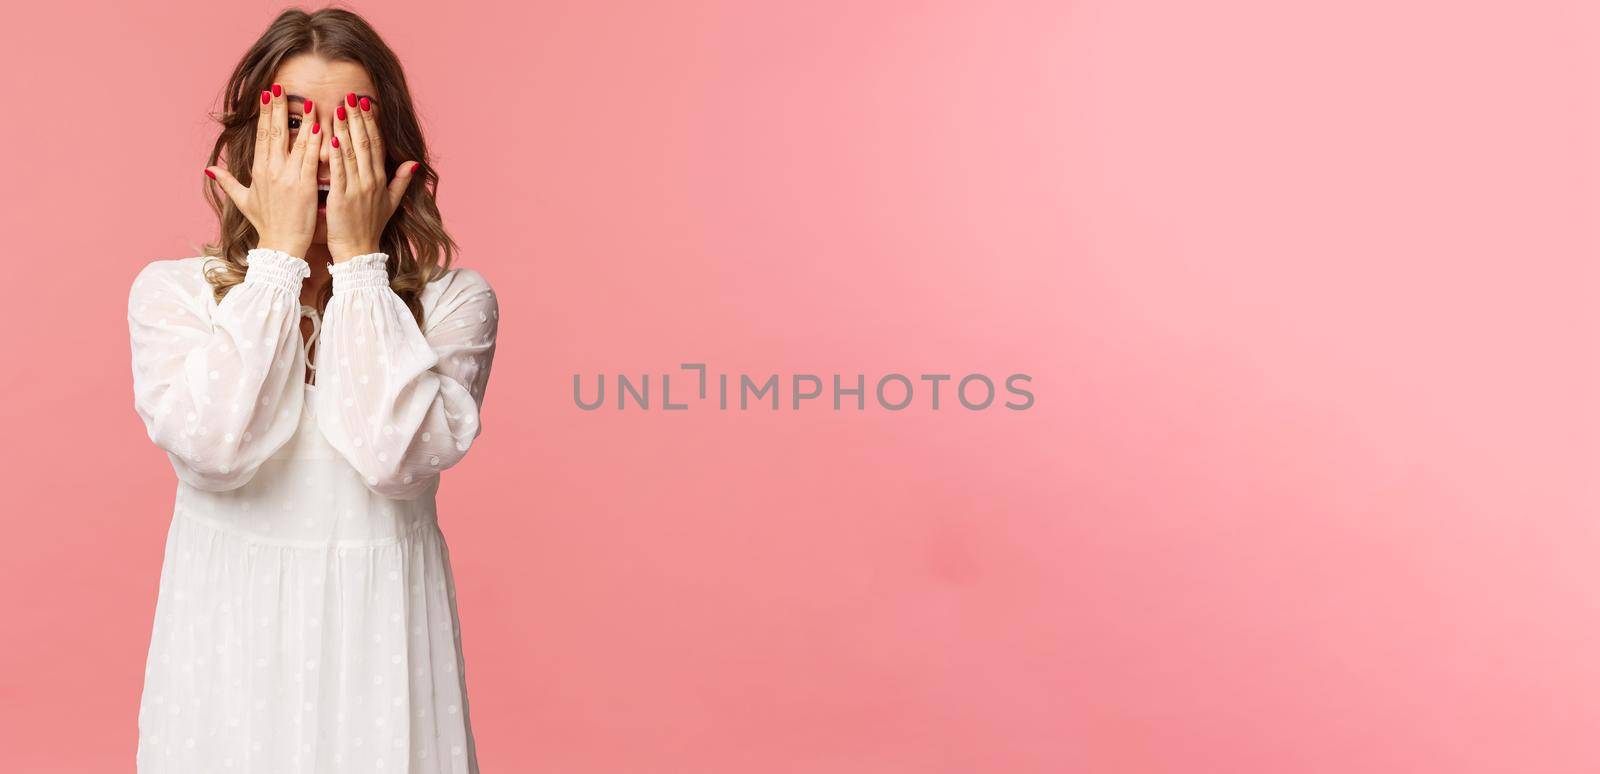 Portrait of silly cute girl with blond short hair, wear white dress, hiding face behind hands, promise to wait for signal but peeking through fingers, cant resist temptation, stand pink background.